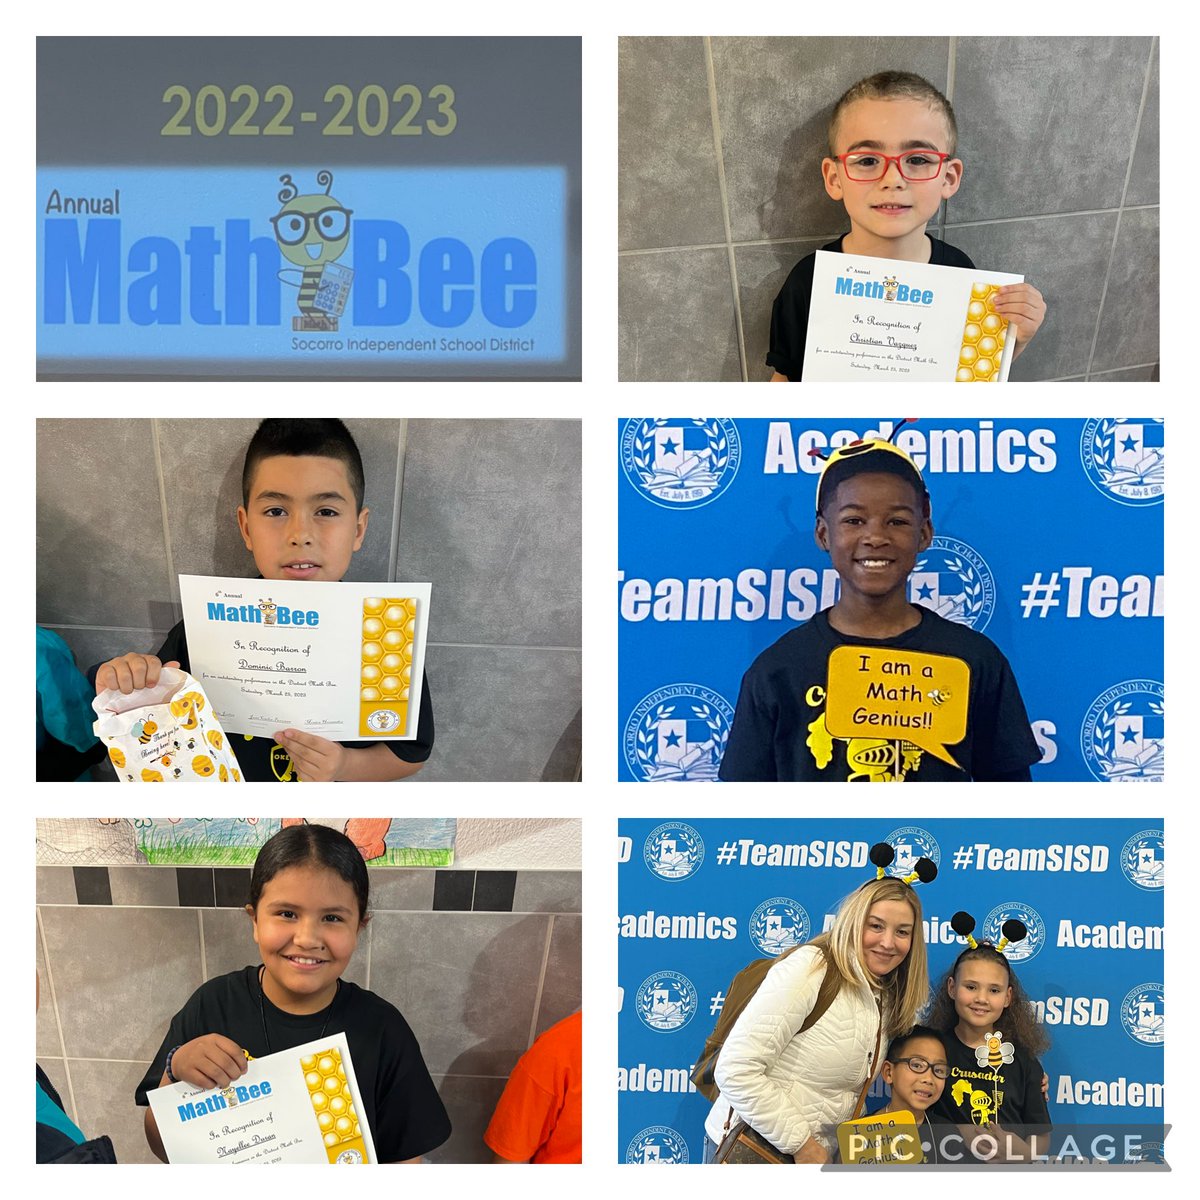 So proud of our SISD Math Bee participants. 🐝 Each is a true math genius! You represented O’Shea Keleher really well. Thank you so much ⁦@NJimenez_OKES⁩ for your hard work as well. 💜💛🐝 #TeamSISD #PowerOfYet #Excellence